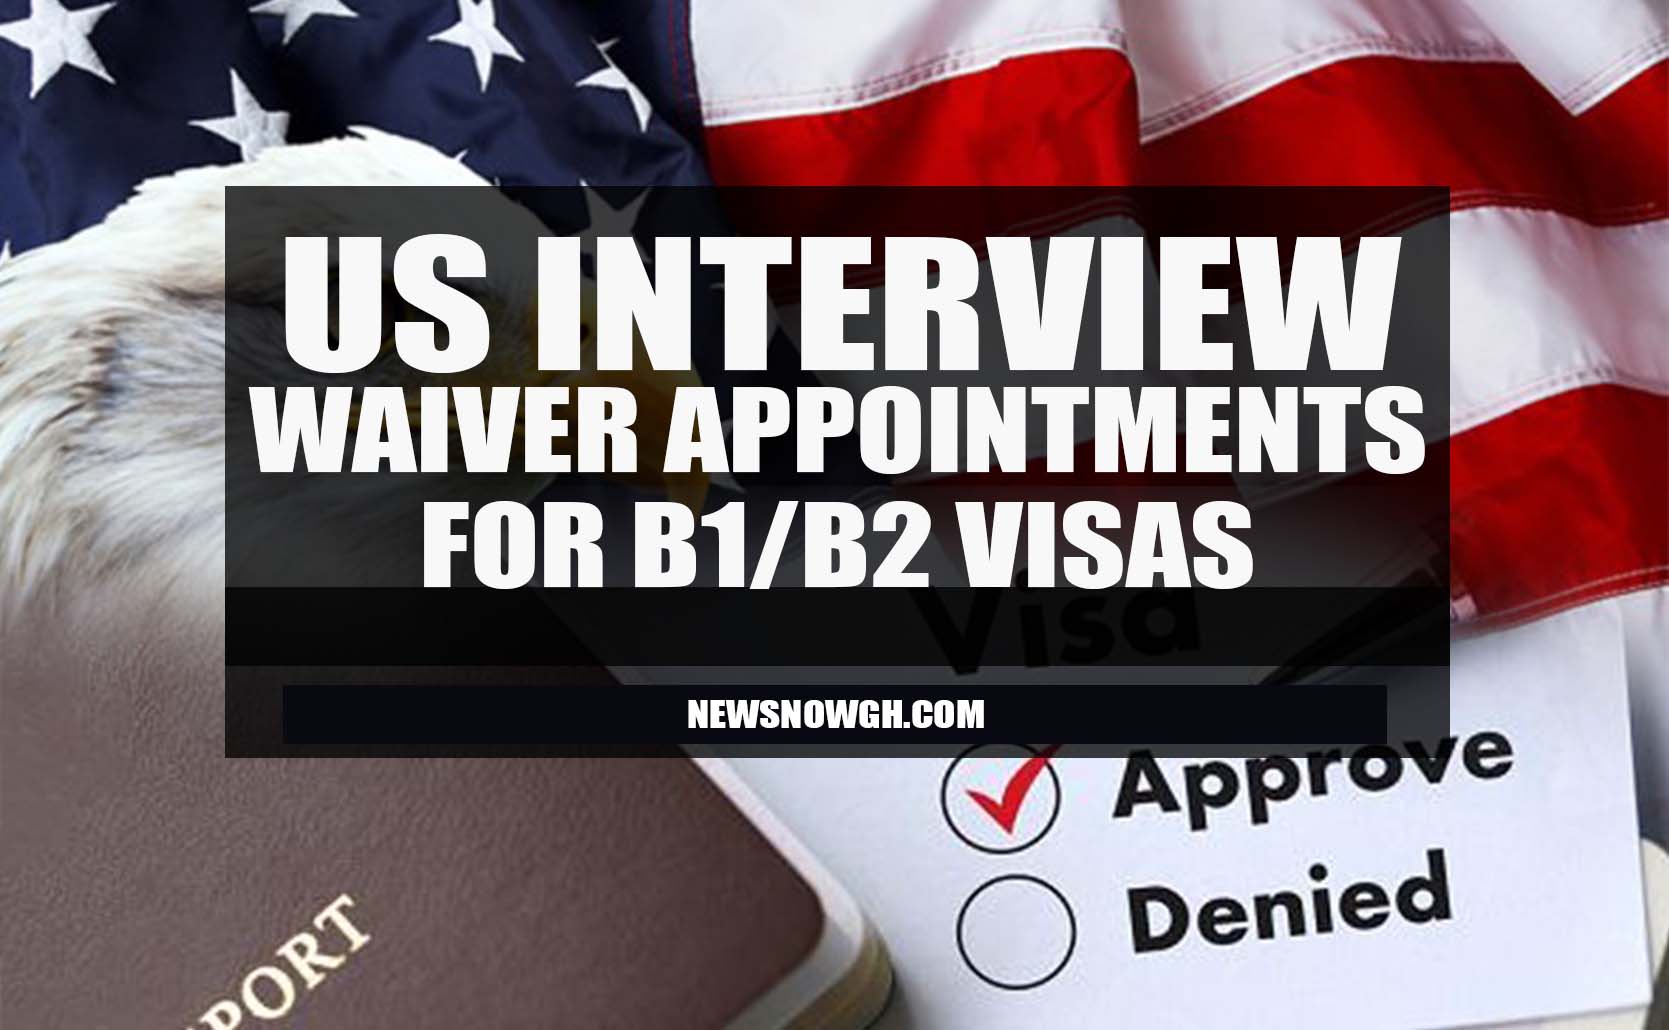 travel.state.gov interview waiver